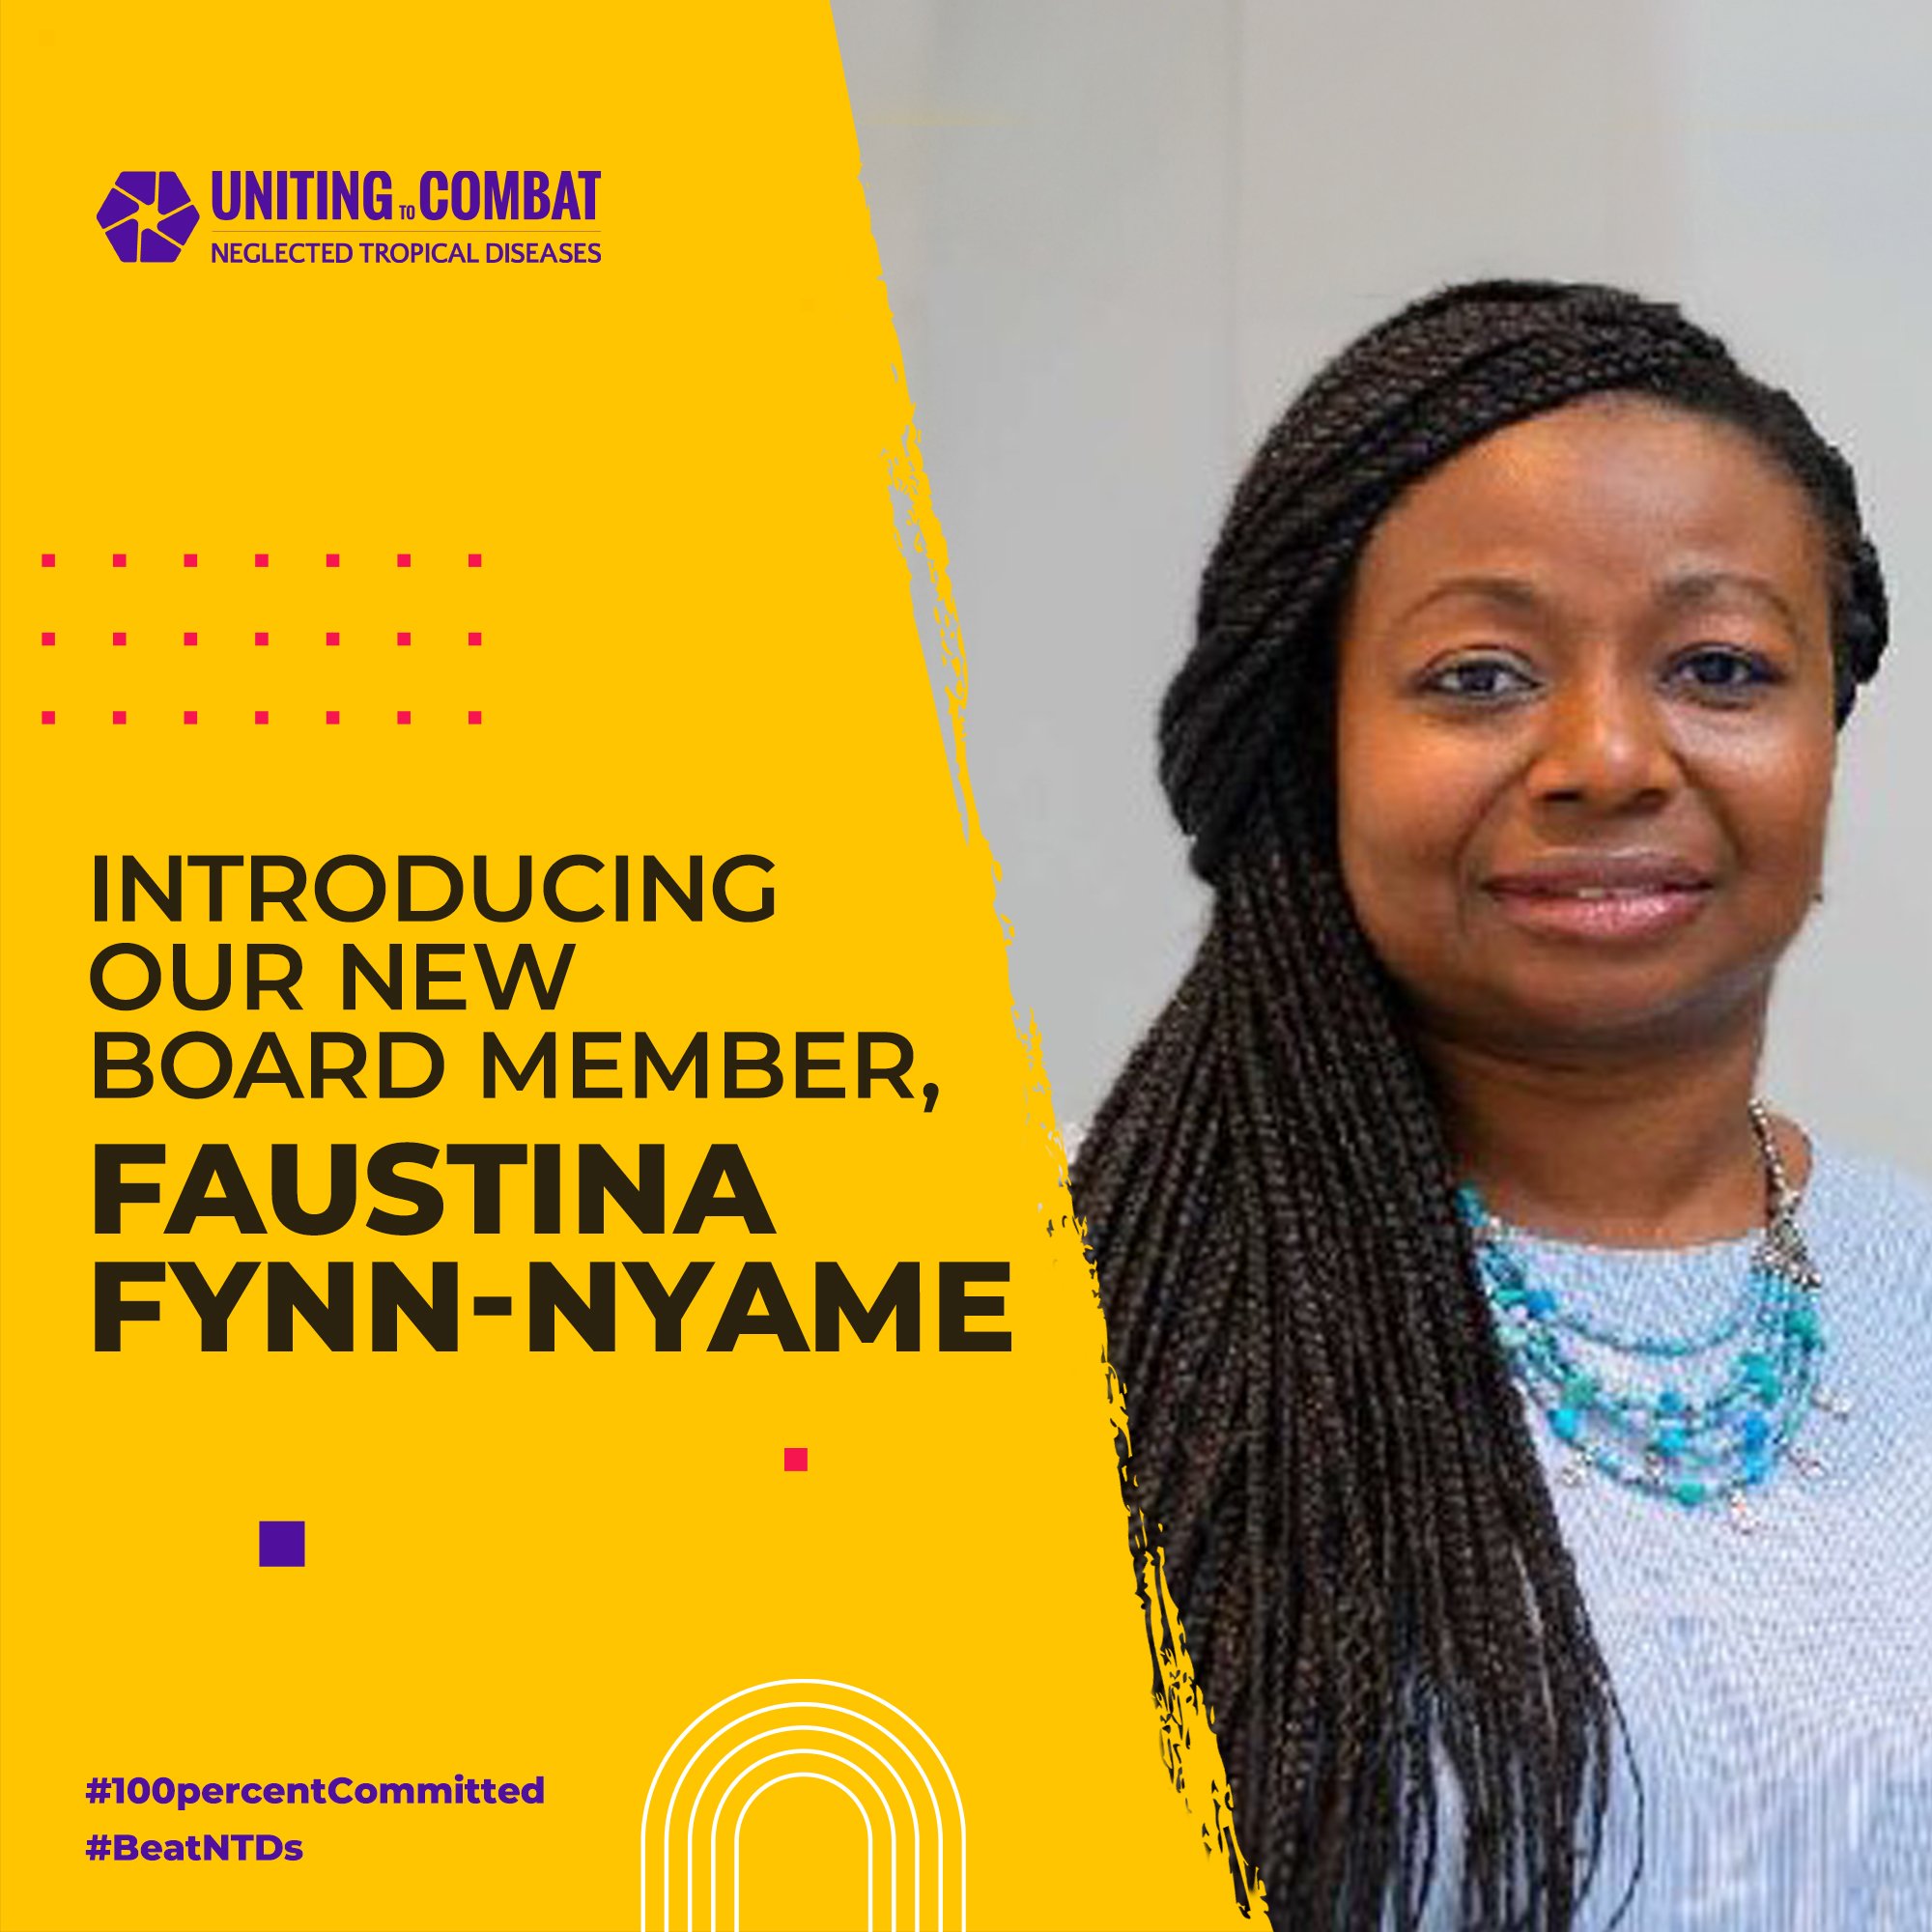 Introducing our new Board member, Faustina Fynn-Nyame